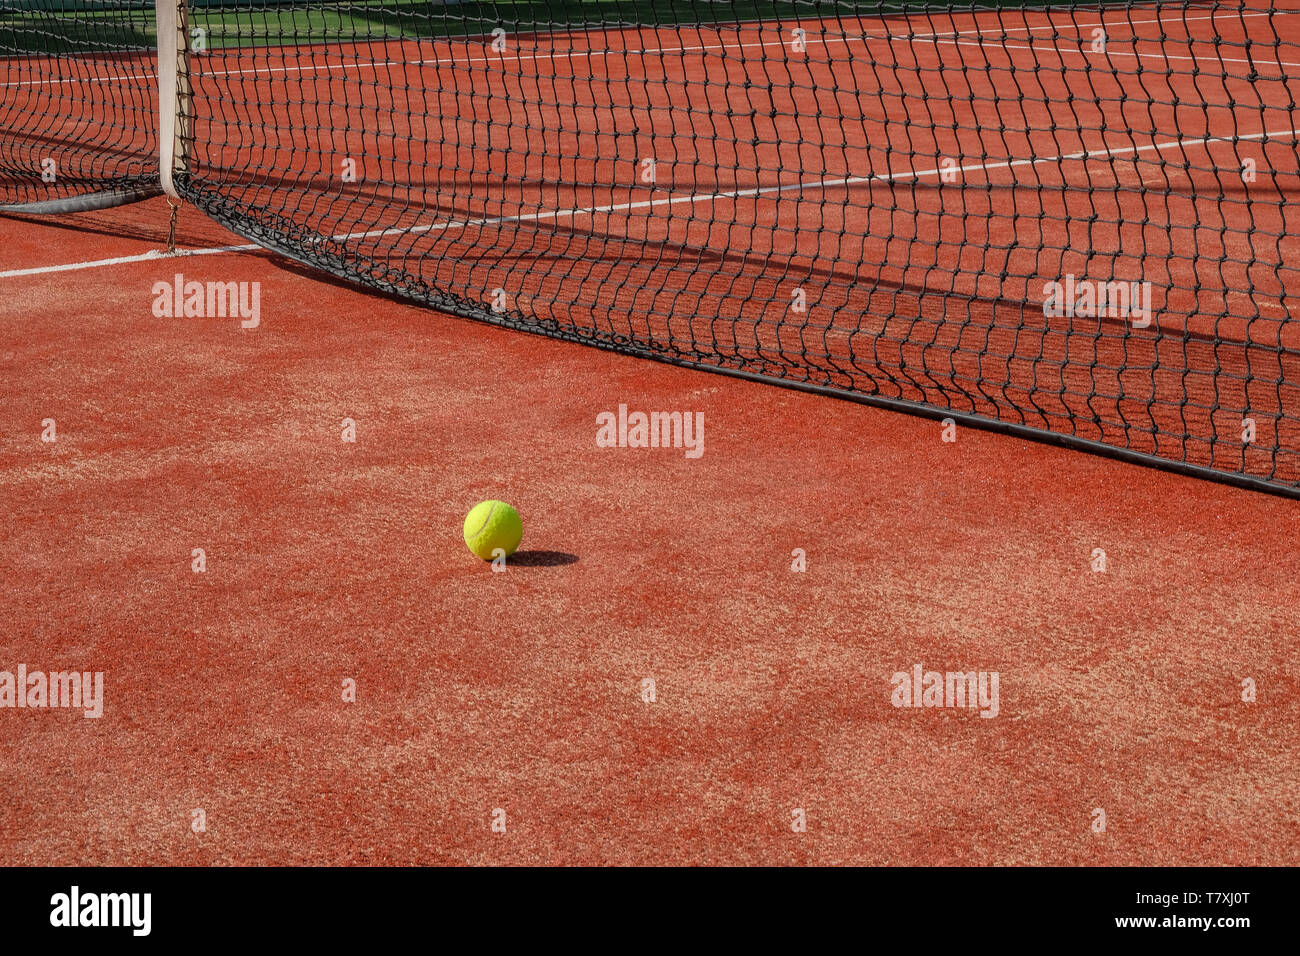 one tennis ball lying in front of a tennis net on a tennis court Stock Photo